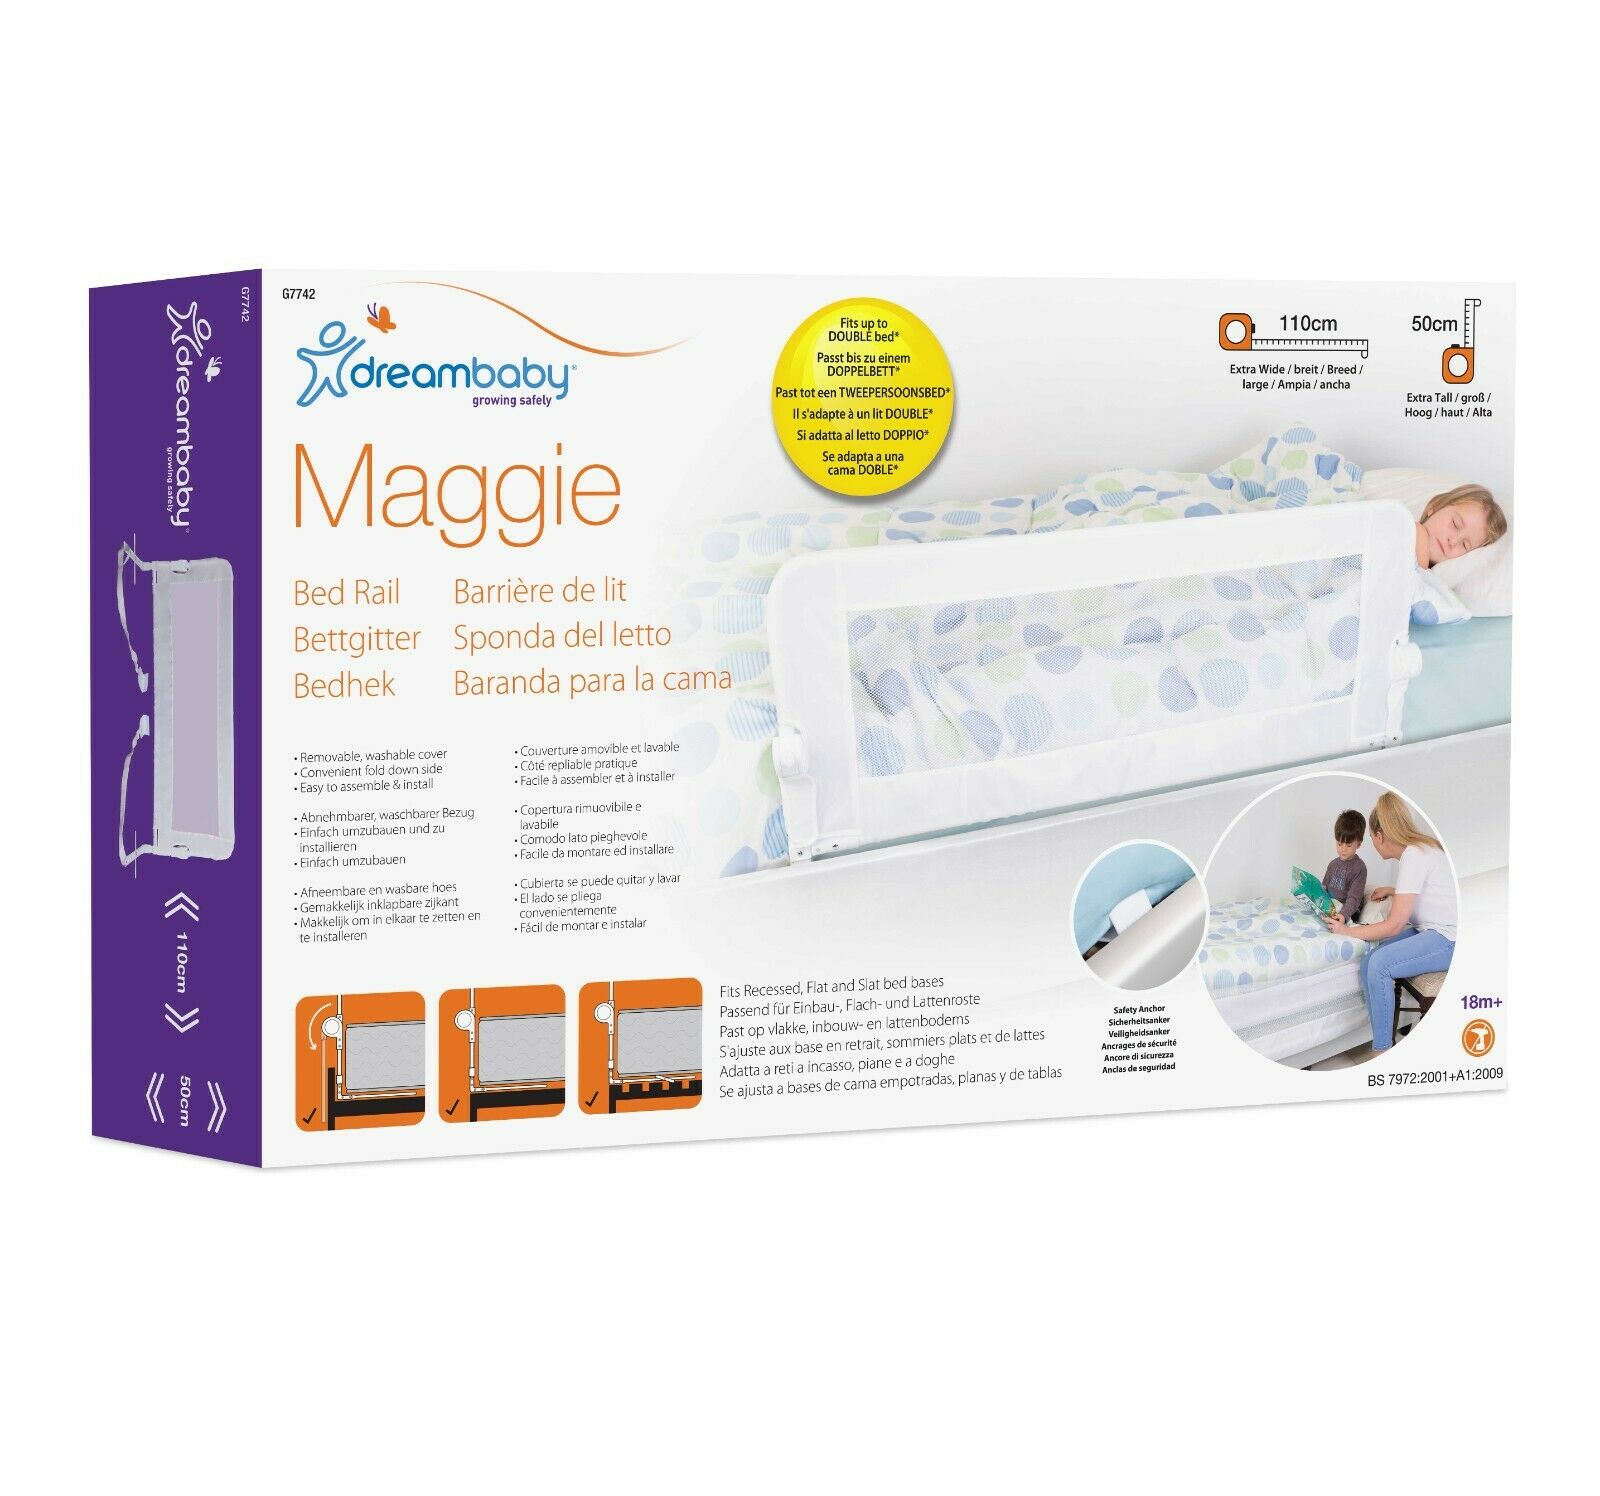 DREAMBABY FOLDING SAFETY GATE BED RAIL MAGGIE 110CM